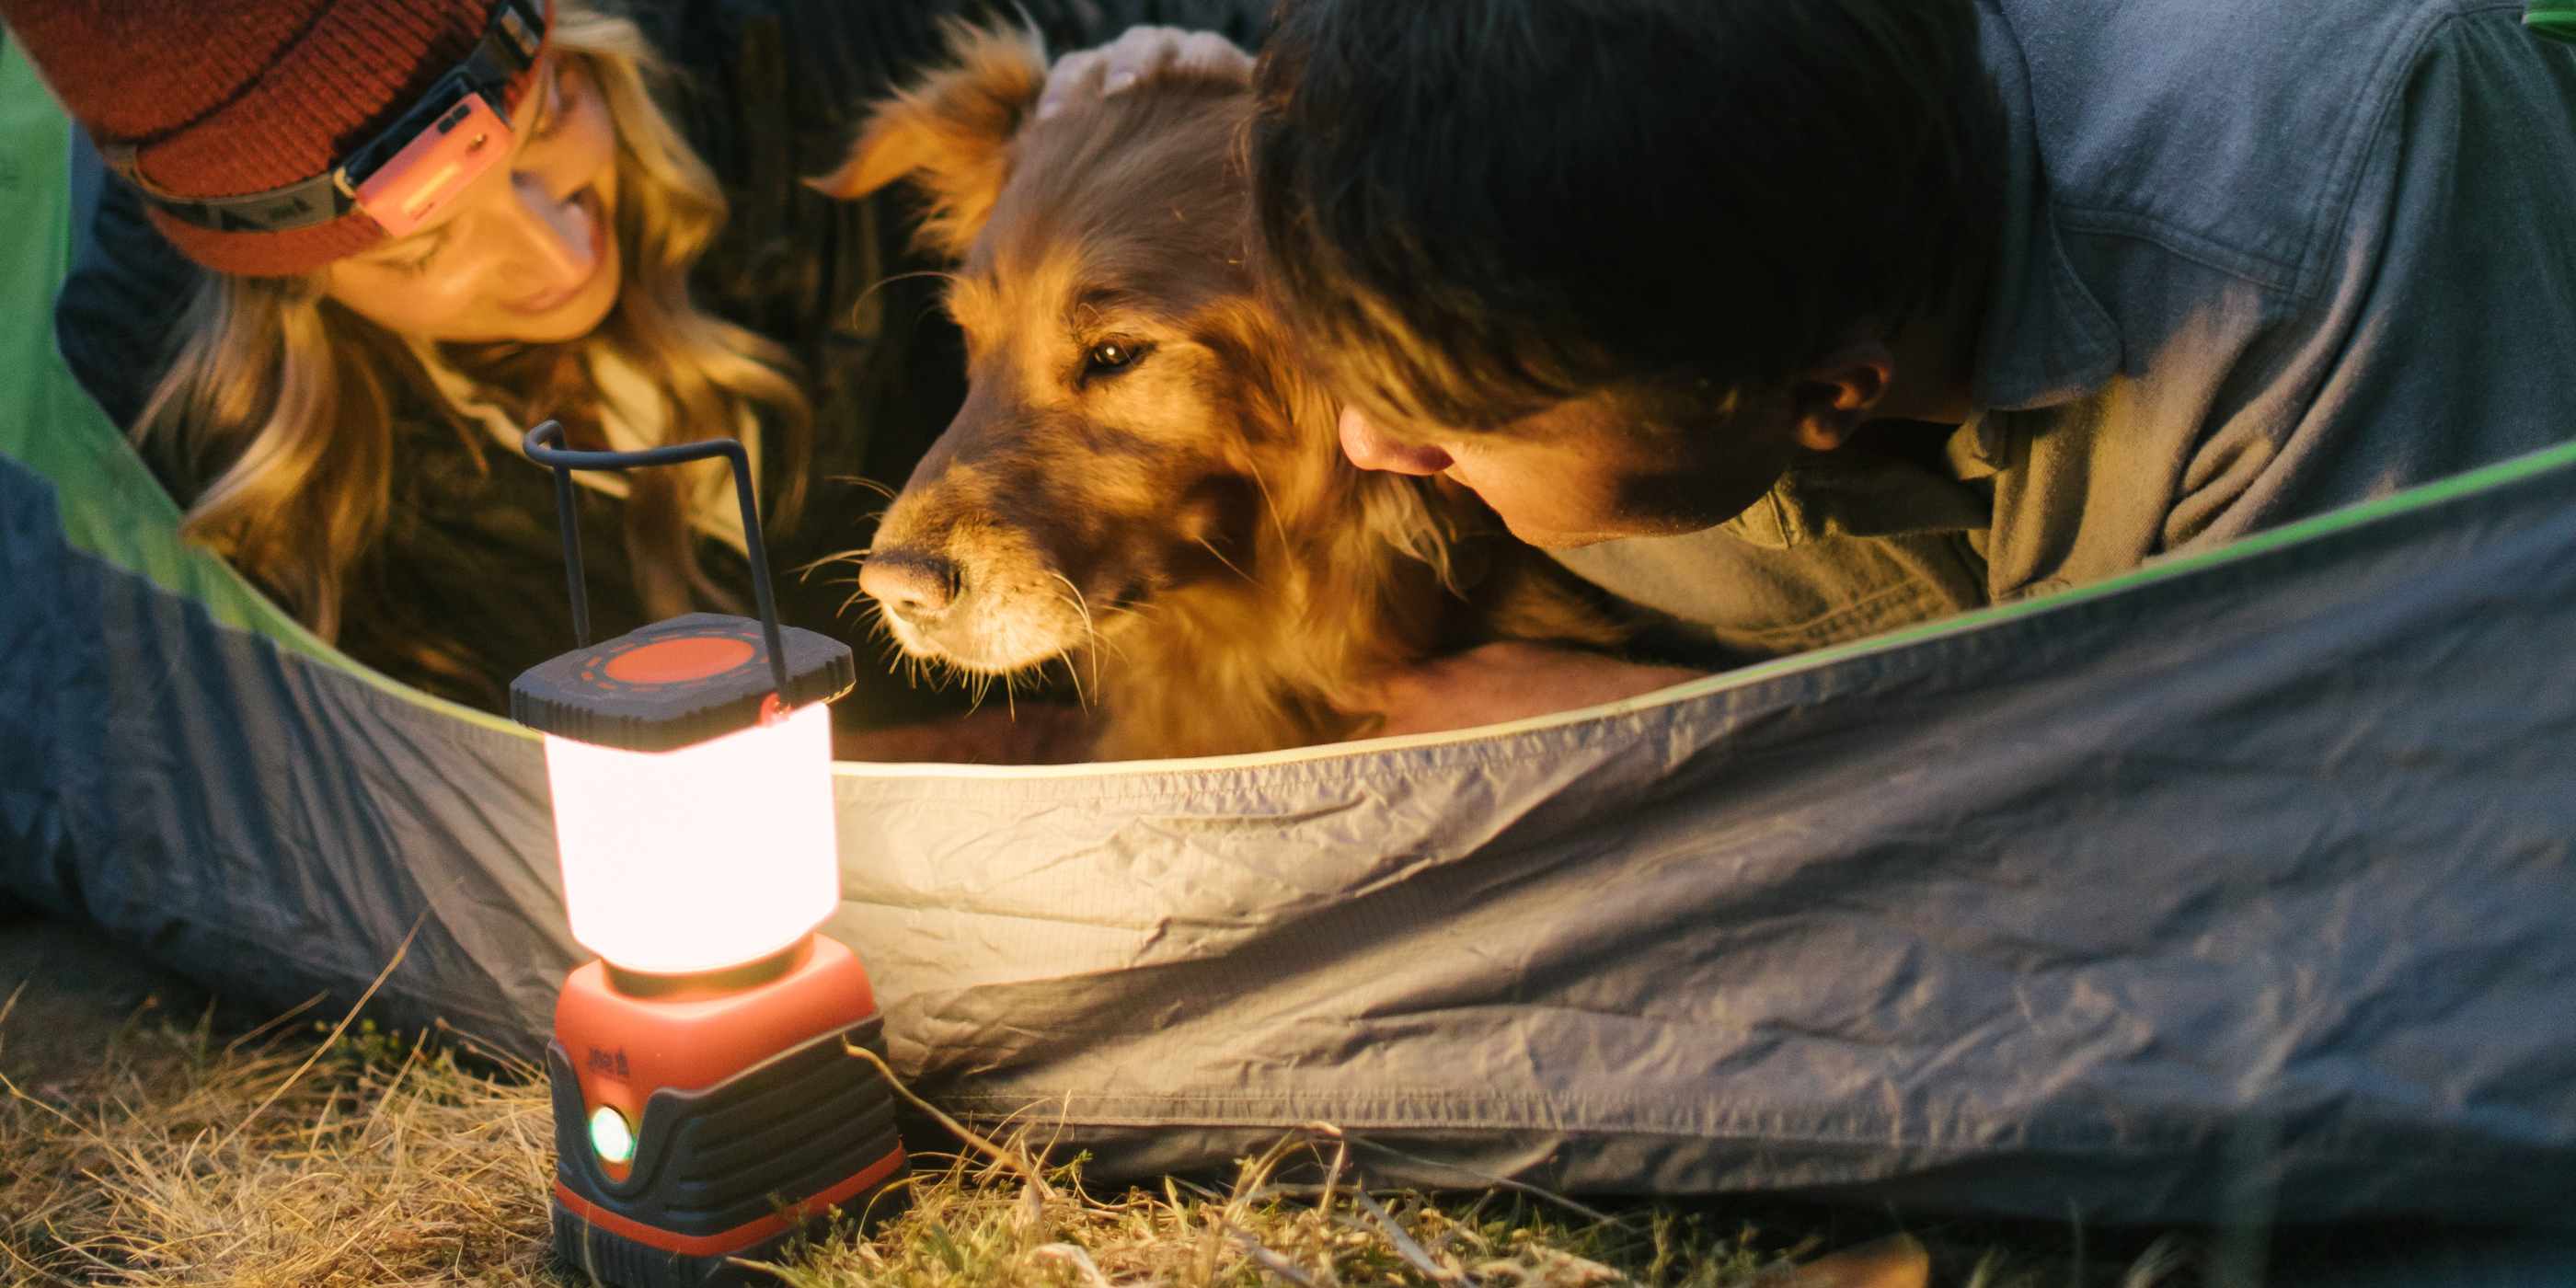 SOL Camping Lantern Lit in Front of Open Tent with Golden Retriever and Woman in Tent